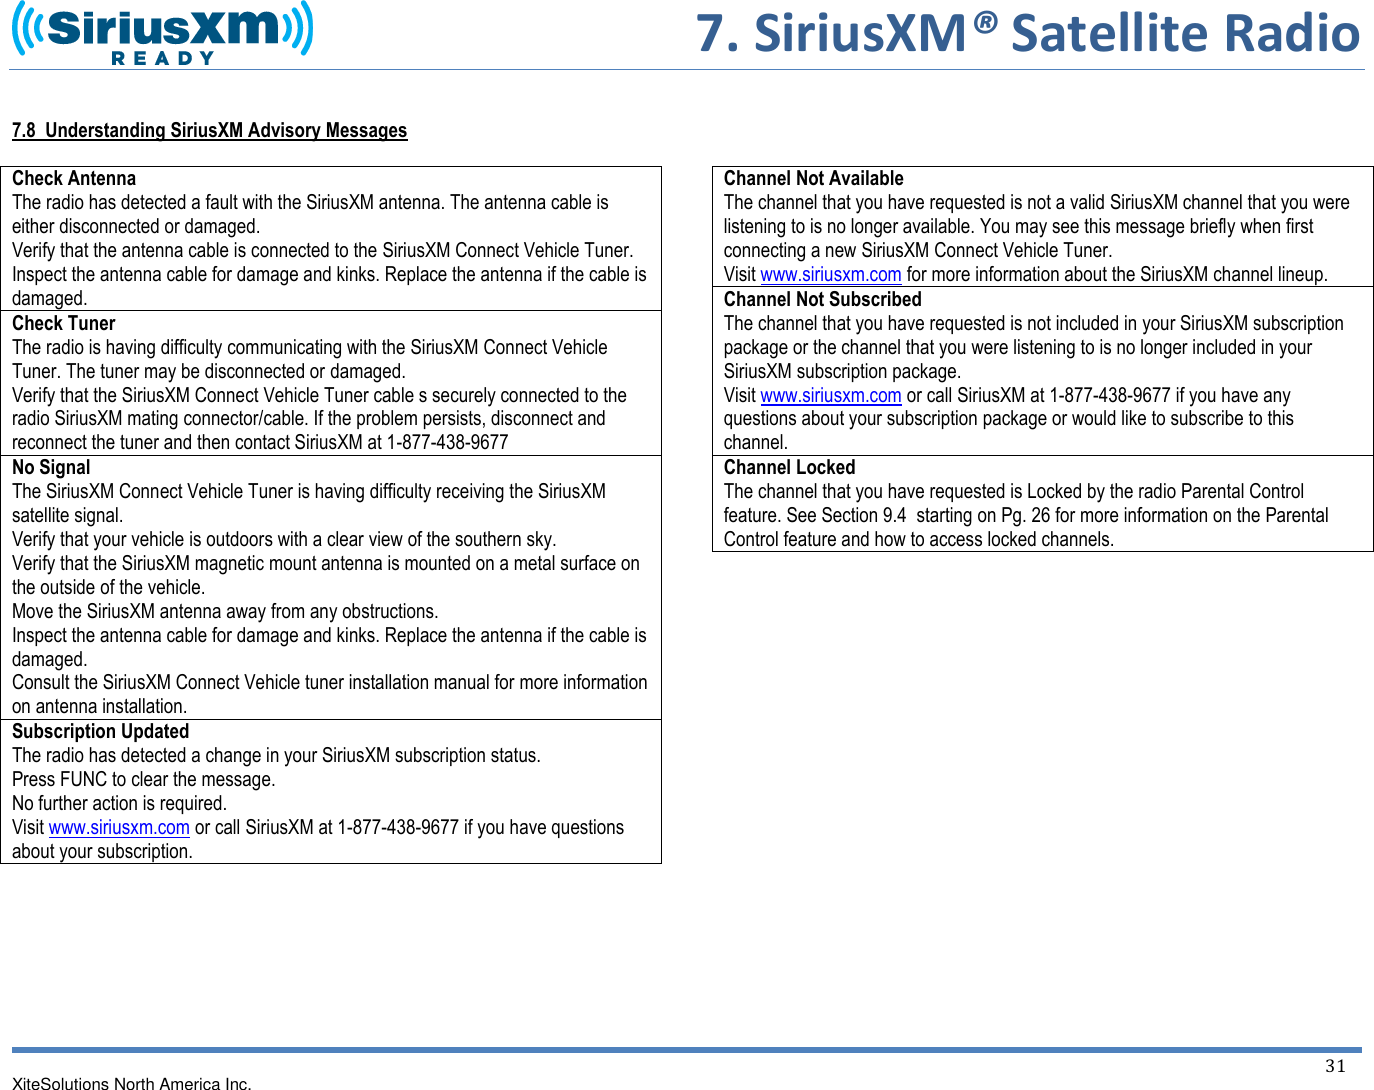       7. SiriusXM® Satellite Radio XiteSolutions North America Inc.  31   7.8  Understanding SiriusXM Advisory Messages  Check Antenna The radio has detected a fault with the SiriusXM antenna. The antenna cable is either disconnected or damaged.  Verify that the antenna cable is connected to the SiriusXM Connect Vehicle Tuner. Inspect the antenna cable for damage and kinks. Replace the antenna if the cable is damaged. Check Tuner The radio is having difficulty communicating with the SiriusXM Connect Vehicle Tuner. The tuner may be disconnected or damaged.  Verify that the SiriusXM Connect Vehicle Tuner cable s securely connected to the radio SiriusXM mating connector/cable. If the problem persists, disconnect and reconnect the tuner and then contact SiriusXM at 1-877-438-9677 No Signal The SiriusXM Connect Vehicle Tuner is having difficulty receiving the SiriusXM satellite signal. Verify that your vehicle is outdoors with a clear view of the southern sky. Verify that the SiriusXM magnetic mount antenna is mounted on a metal surface on the outside of the vehicle. Move the SiriusXM antenna away from any obstructions. Inspect the antenna cable for damage and kinks. Replace the antenna if the cable is damaged. Consult the SiriusXM Connect Vehicle tuner installation manual for more information on antenna installation. Subscription Updated The radio has detected a change in your SiriusXM subscription status. Press FUNC to clear the message. No further action is required. Visit www.siriusxm.com or call SiriusXM at 1-877-438-9677 if you have questions about your subscription.            Channel Not Available  The channel that you have requested is not a valid SiriusXM channel that you were listening to is no longer available. You may see this message briefly when first connecting a new SiriusXM Connect Vehicle Tuner. Visit www.siriusxm.com for more information about the SiriusXM channel lineup. Channel Not Subscribed The channel that you have requested is not included in your SiriusXM subscription package or the channel that you were listening to is no longer included in your SiriusXM subscription package.  Visit www.siriusxm.com or call SiriusXM at 1-877-438-9677 if you have any questions about your subscription package or would like to subscribe to this channel. Channel Locked The channel that you have requested is Locked by the radio Parental Control feature. See Section 9.4  starting on Pg. 26 for more information on the Parental Control feature and how to access locked channels.            